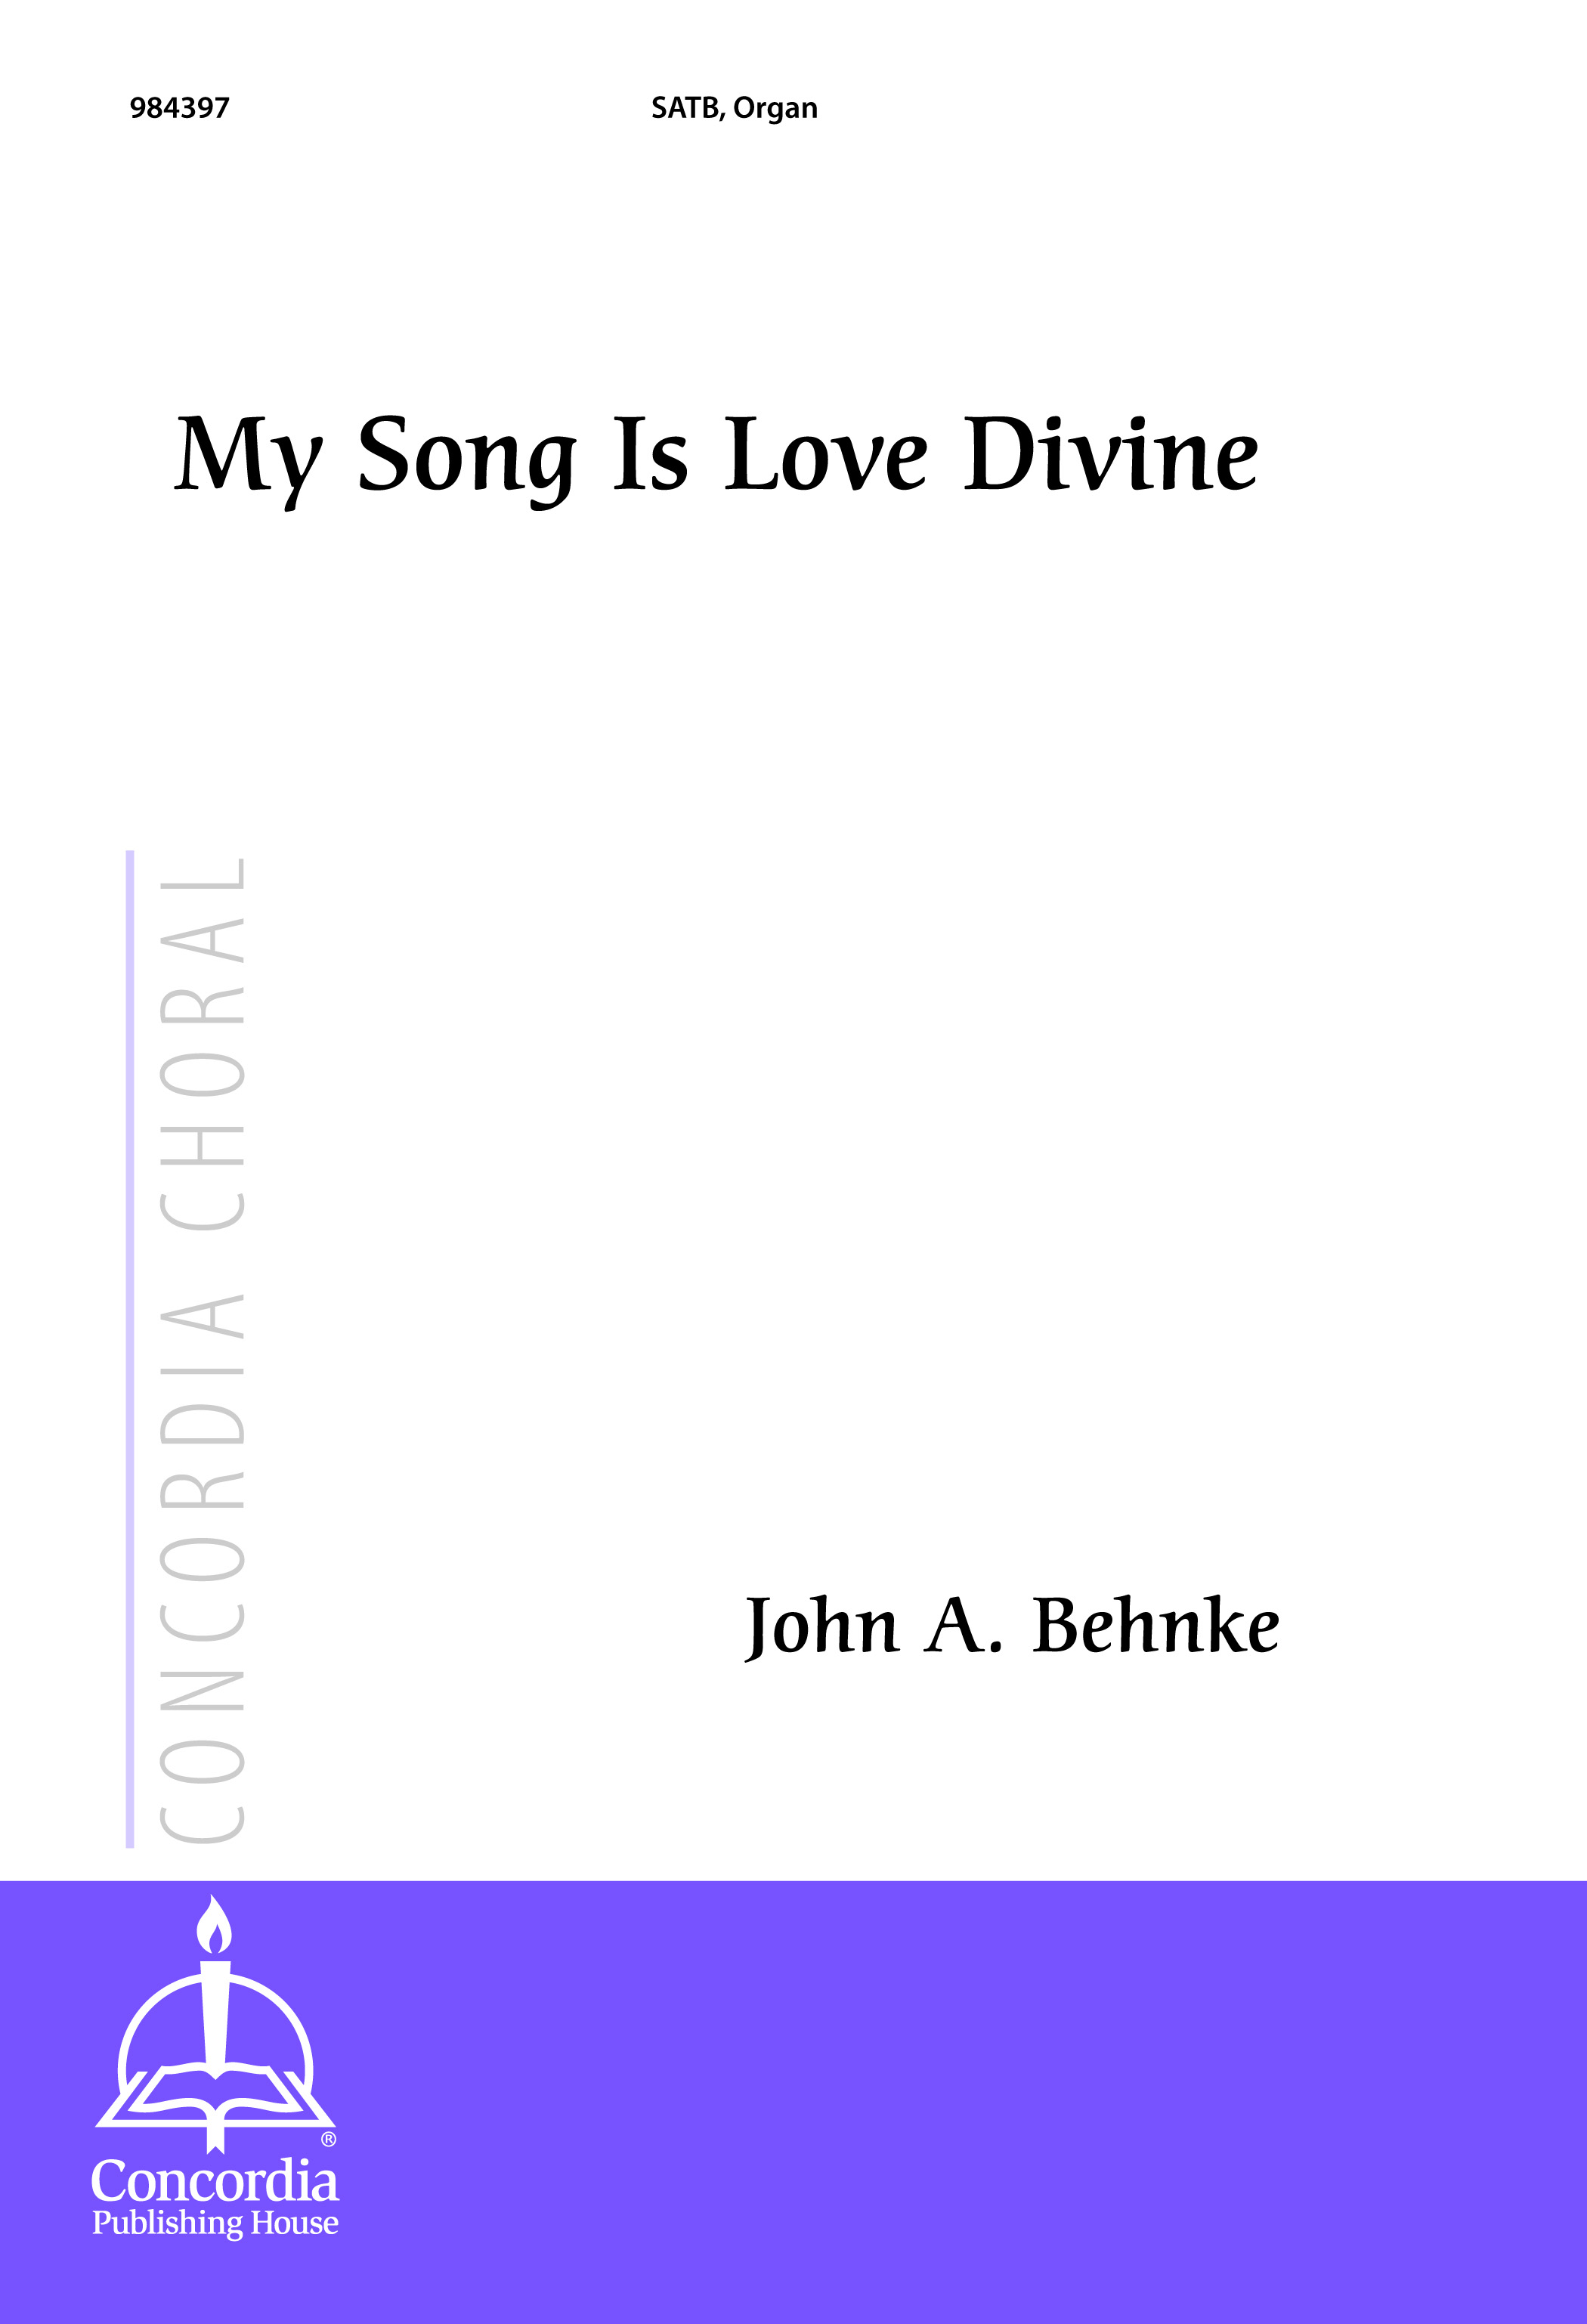 My Song Is Love Divine